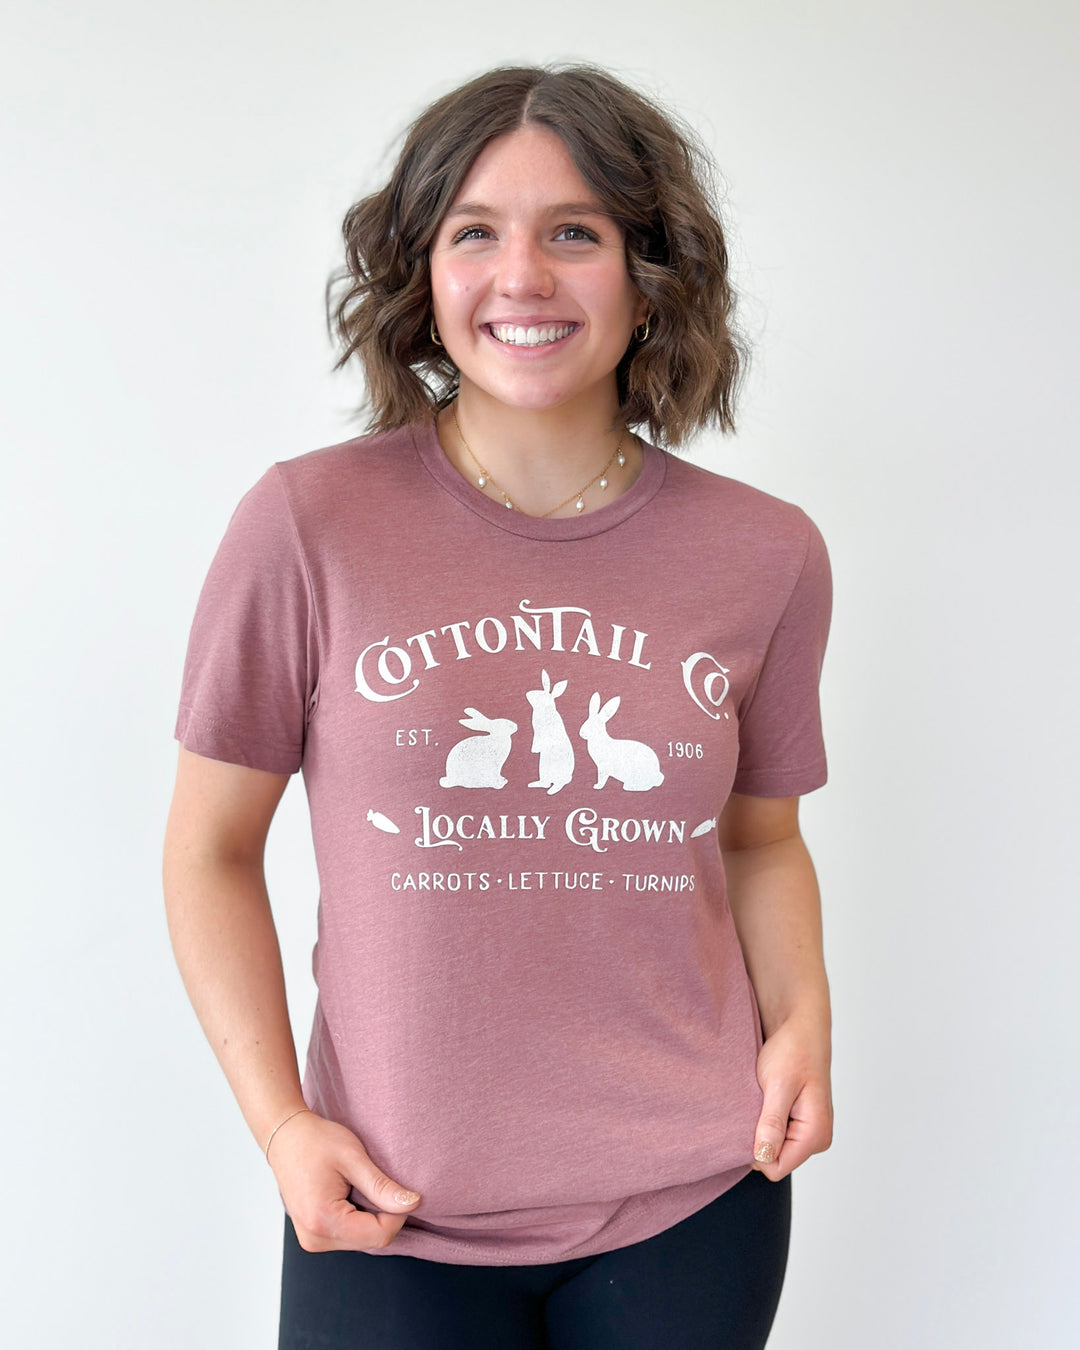 Cottontail Co Tee